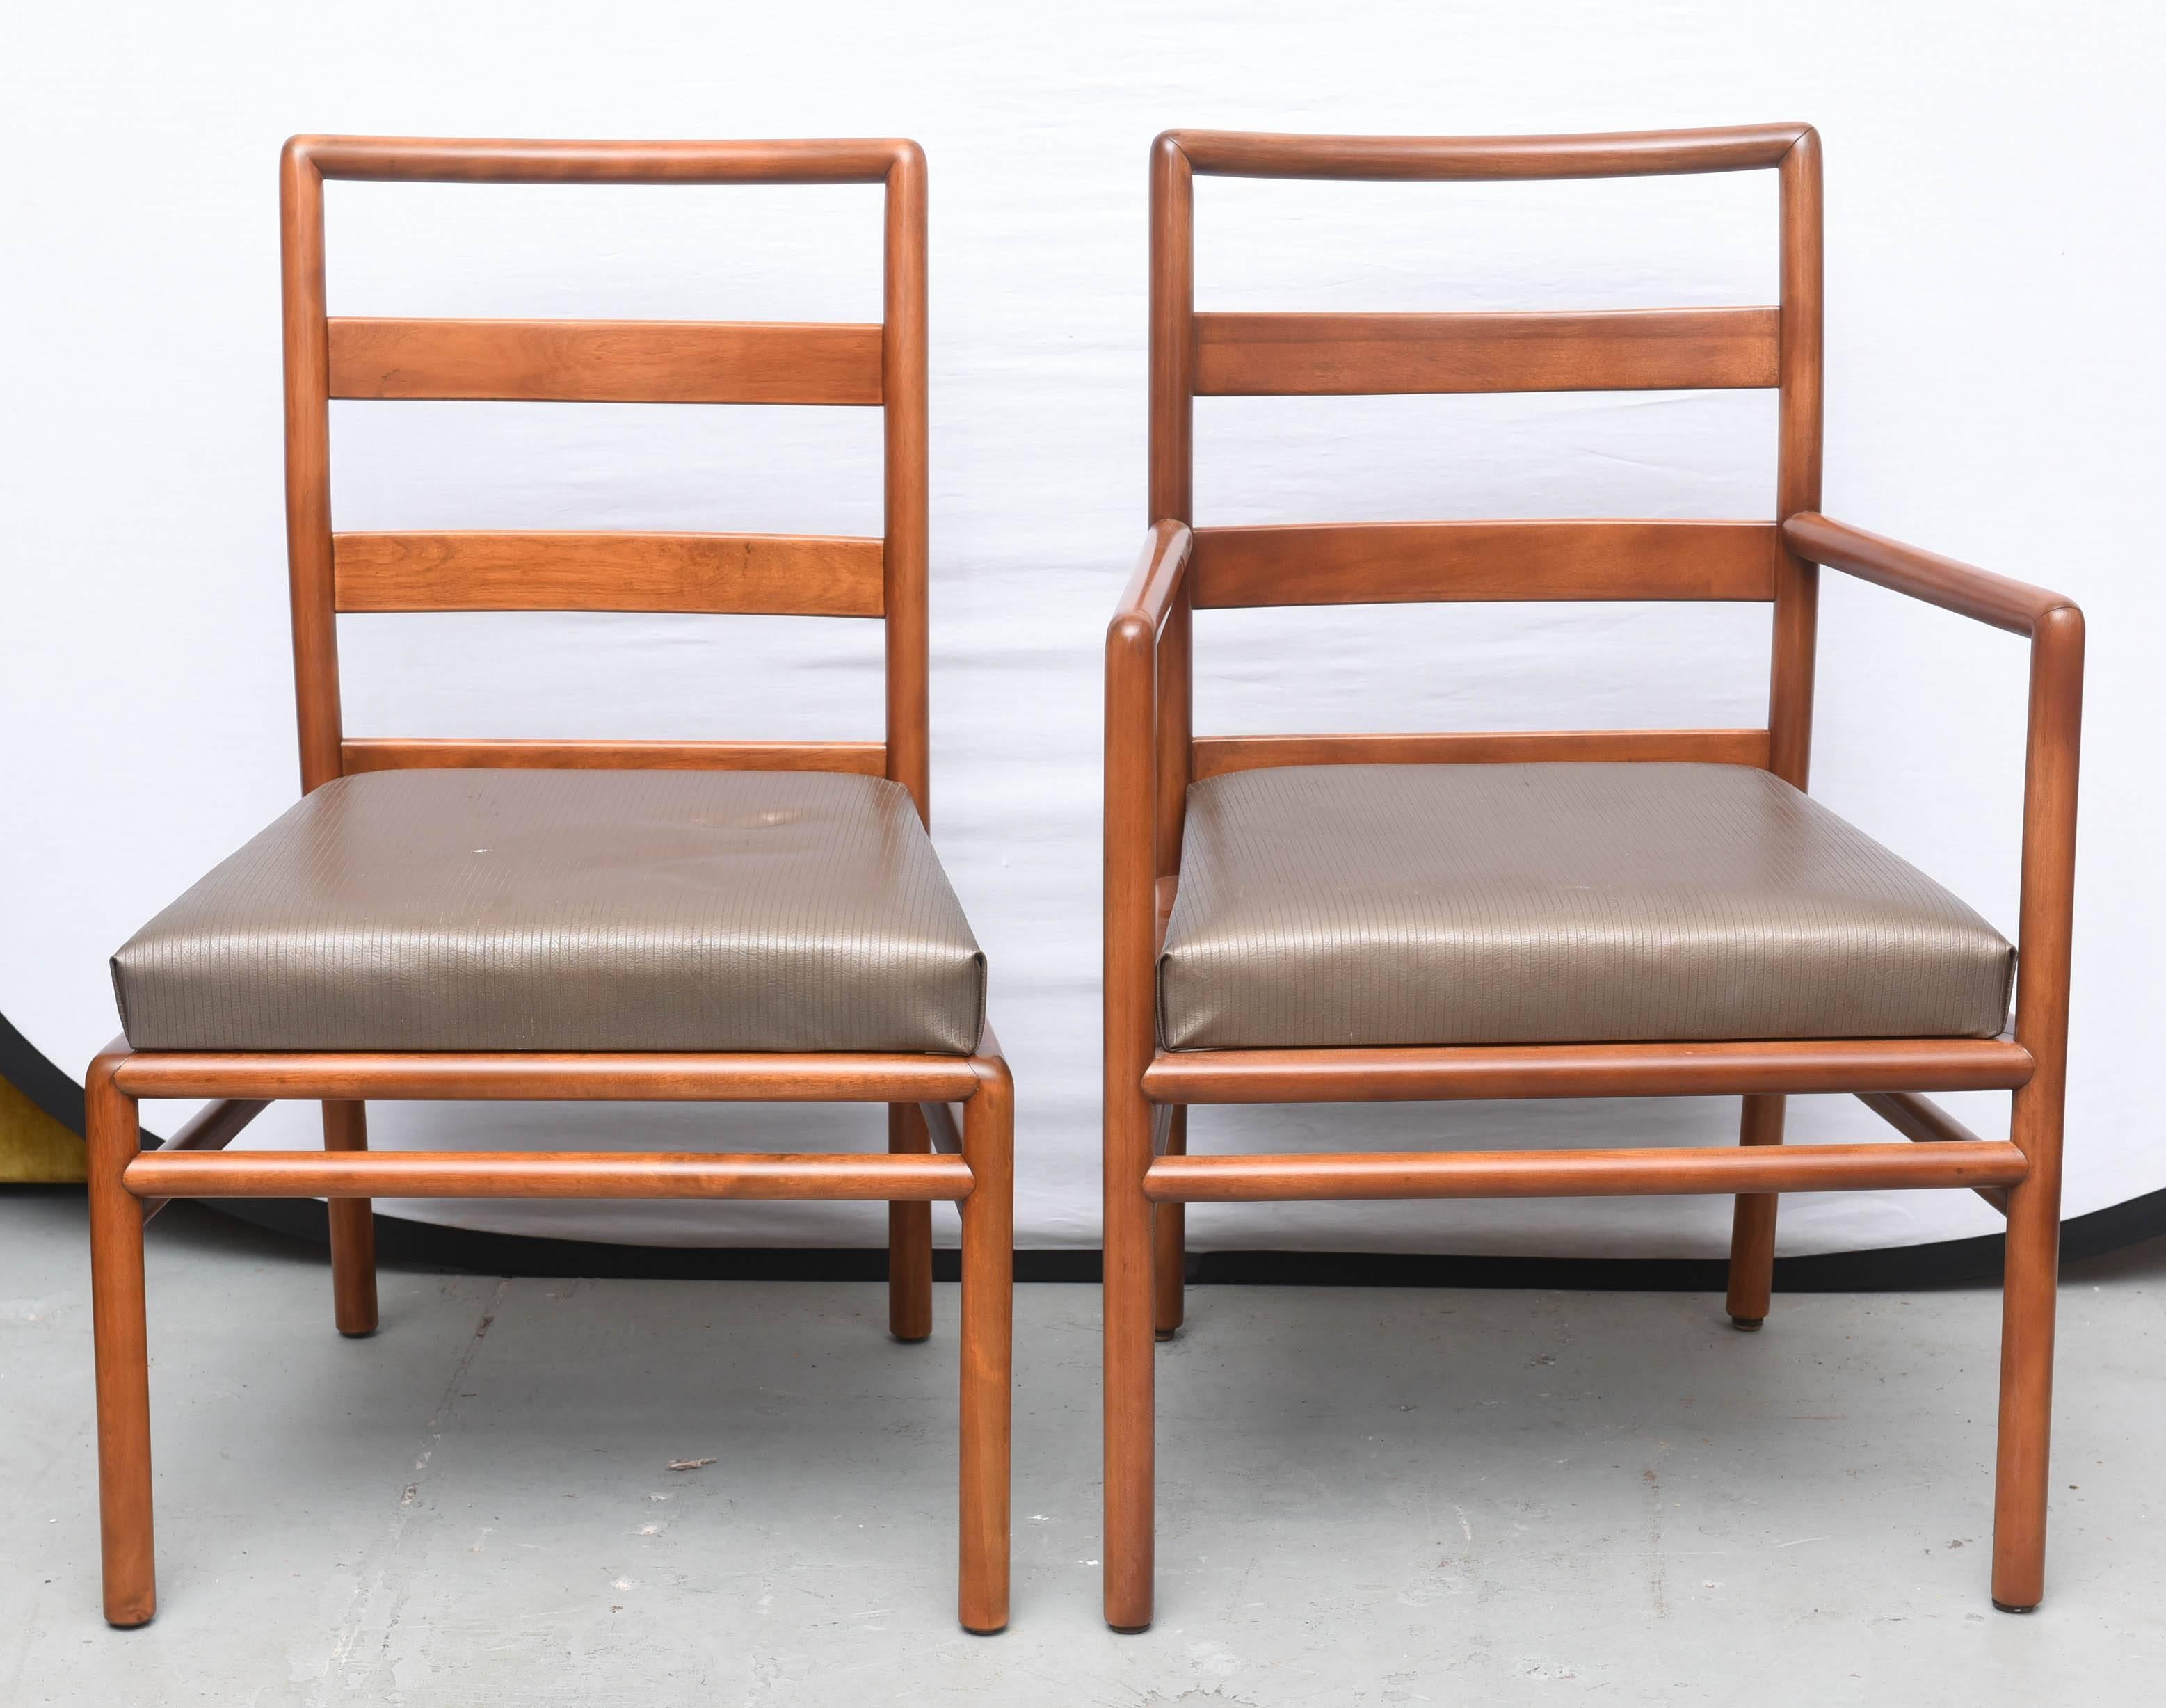 Gorgeous restored ladder back chairs by Robsjohn-Gibbings for Widdicomb in med dark walnut. Two armchairs and six without arms, 1950s, USA.

We also have a set that is light walnut.